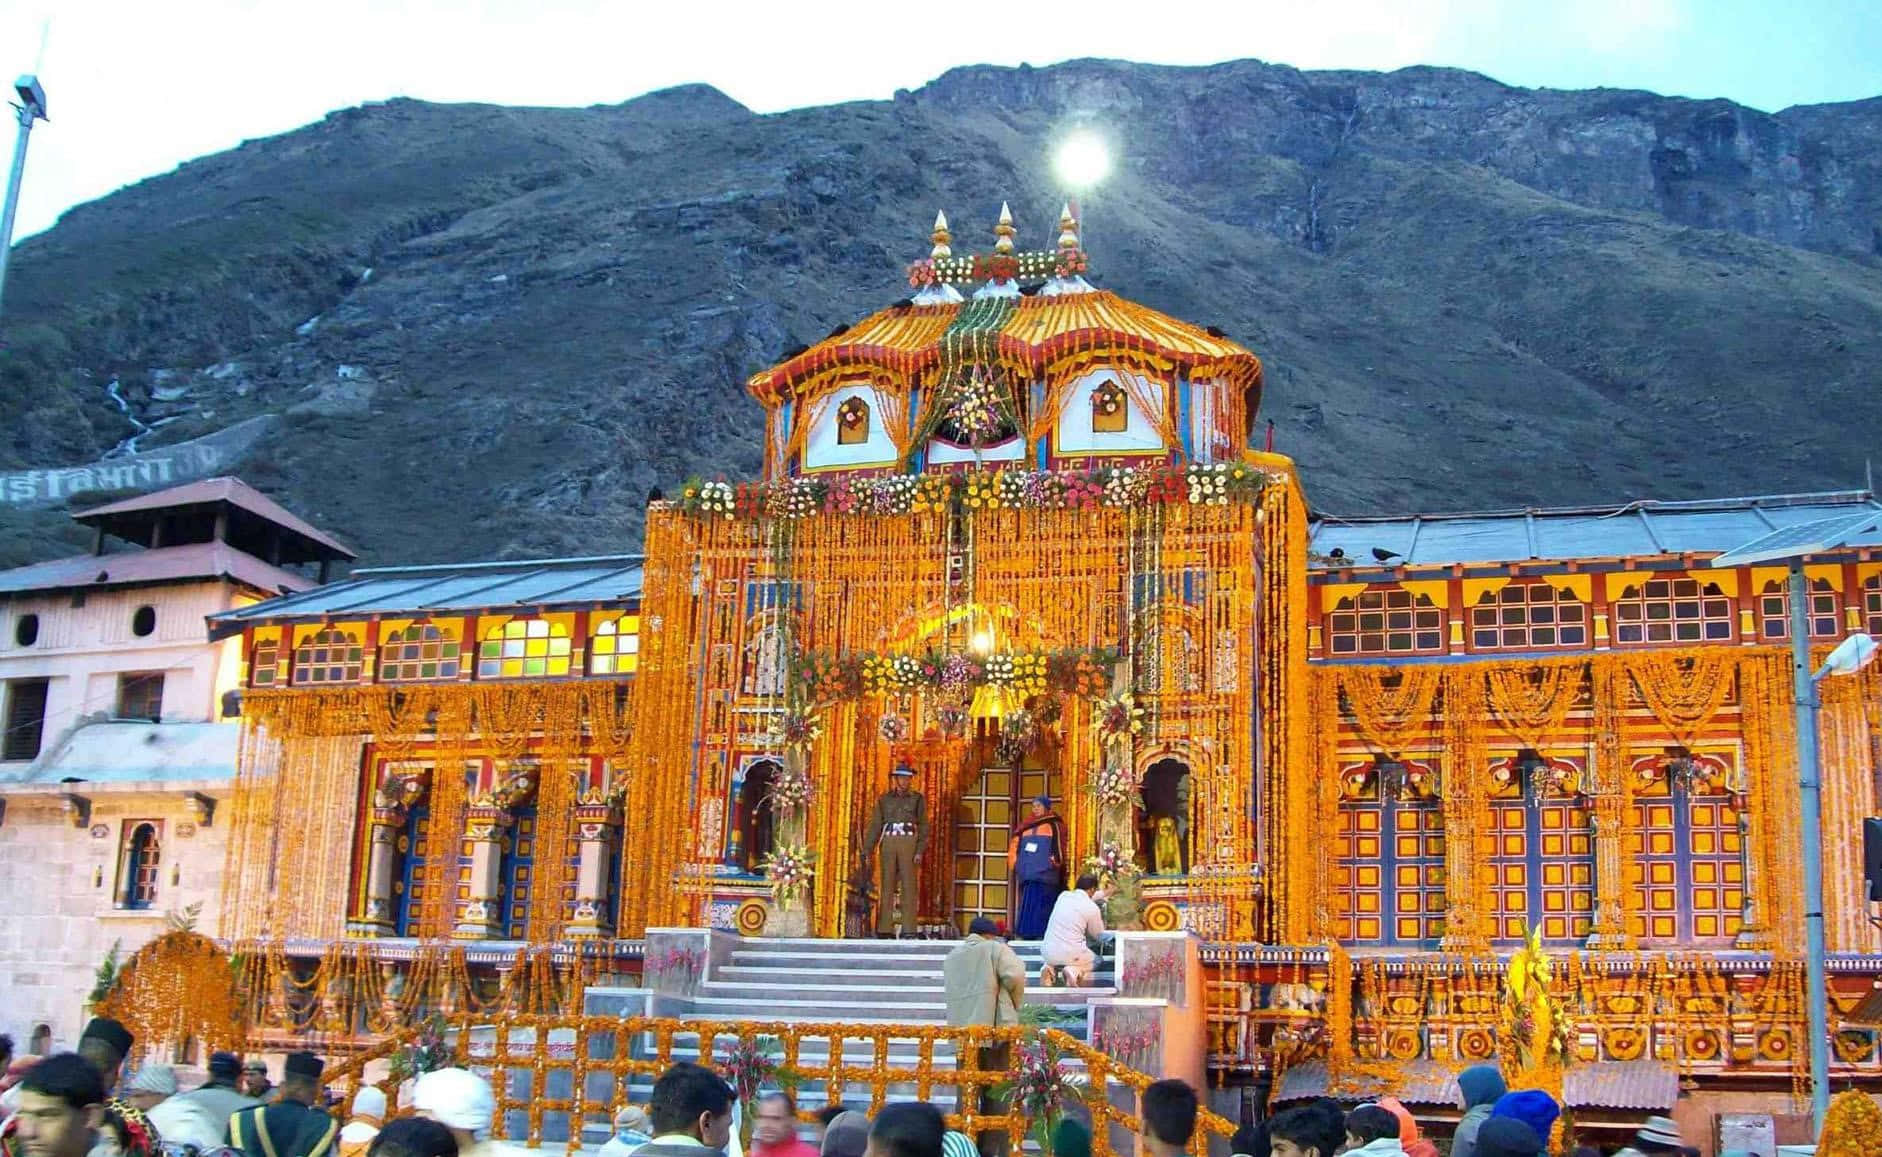 Standing tall amongst the wondrous peaks of the Himalayas, the holy temple of Kedarnath